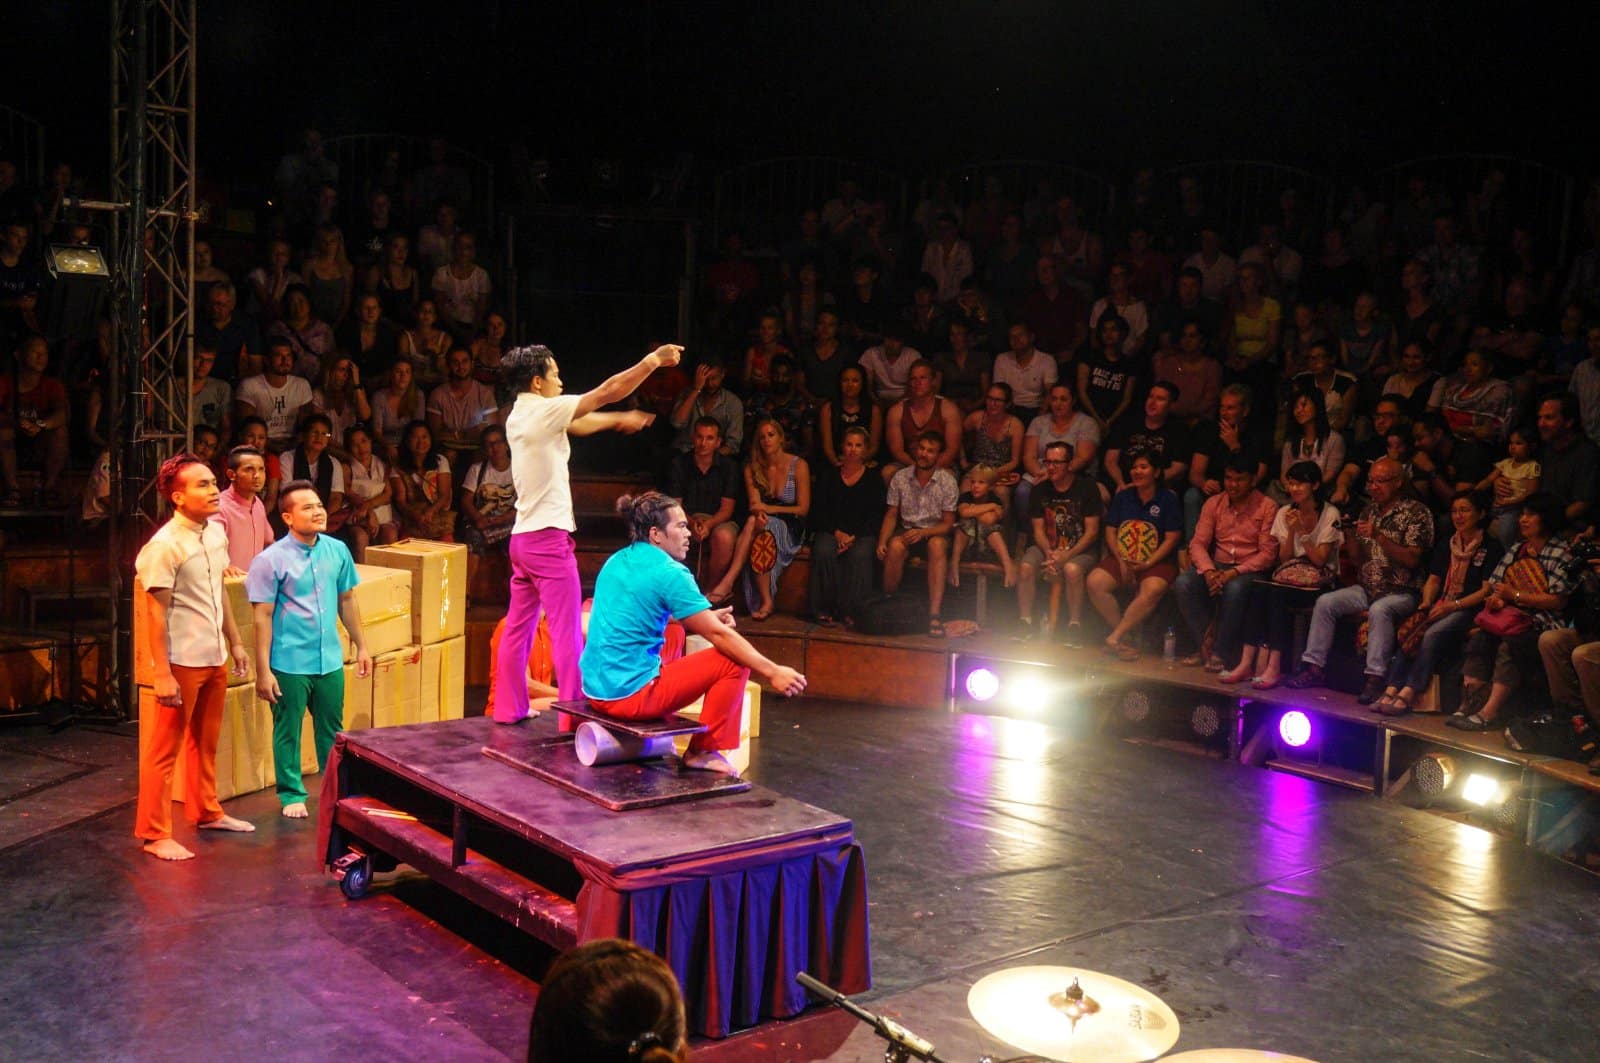 <p><span>Experience Cambodia’s contemporary art scene at the Phare Circus in the evening. This dynamic and inspiring show, performed by talented local artists, blends storytelling with traditional and modern circus arts. </span></p> <p><b>My Insider’s Tip: </b><span>Select a show that resonates with your interests, as each performance uniquely reflects various aspects of Cambodian culture and history. No animals are in the circus performances.</span></p>